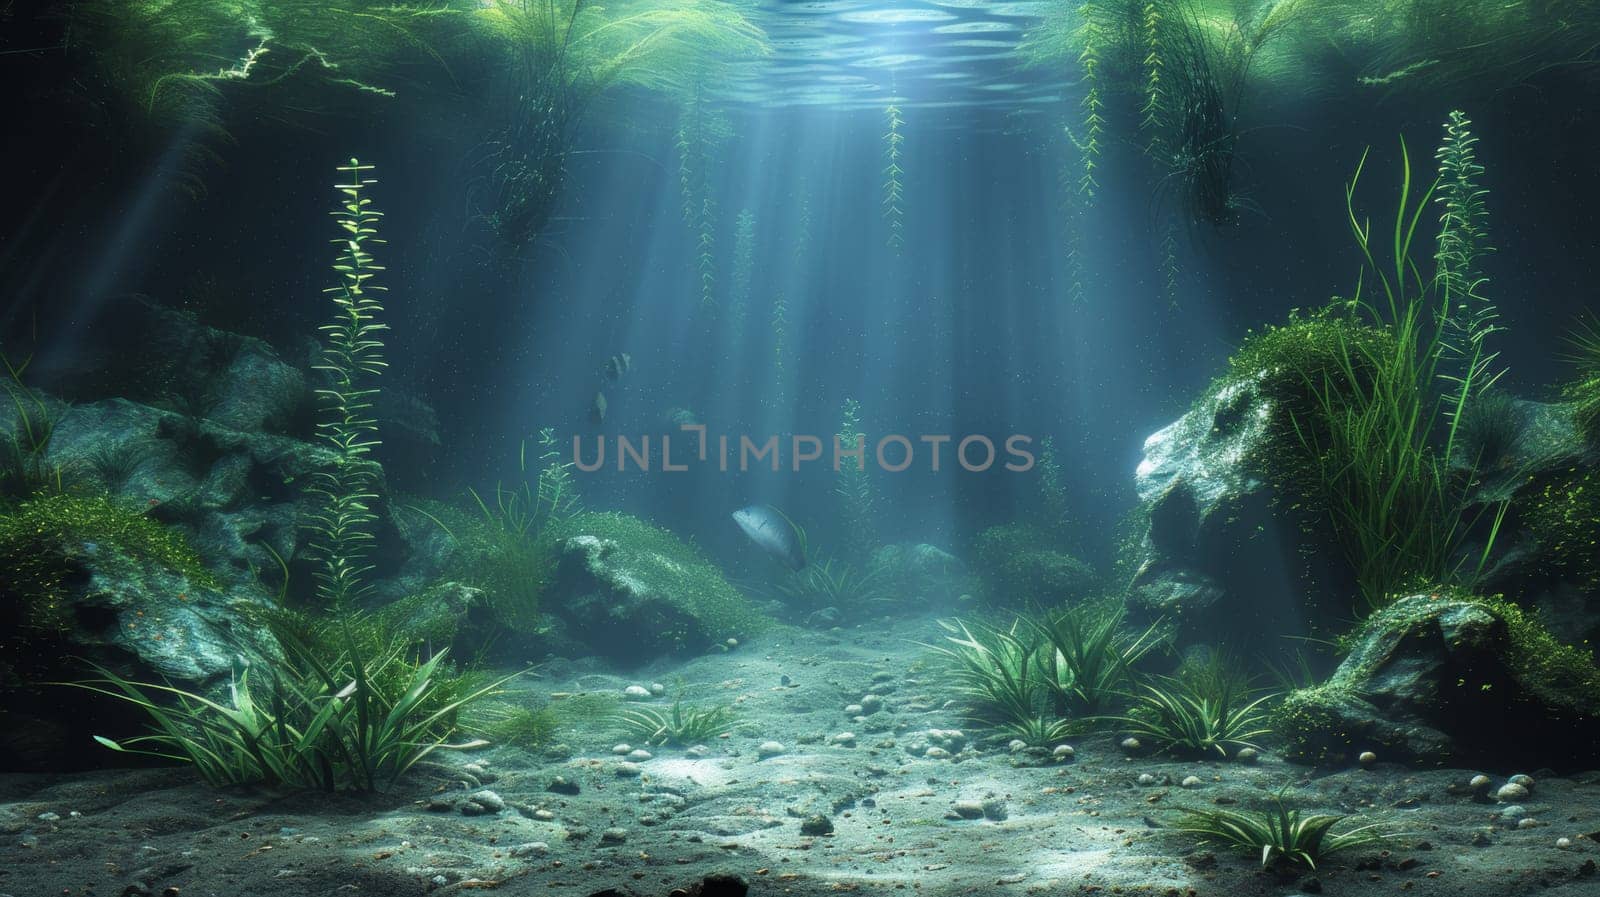 A view of a beautiful underwater scene with sunlight shining through the water